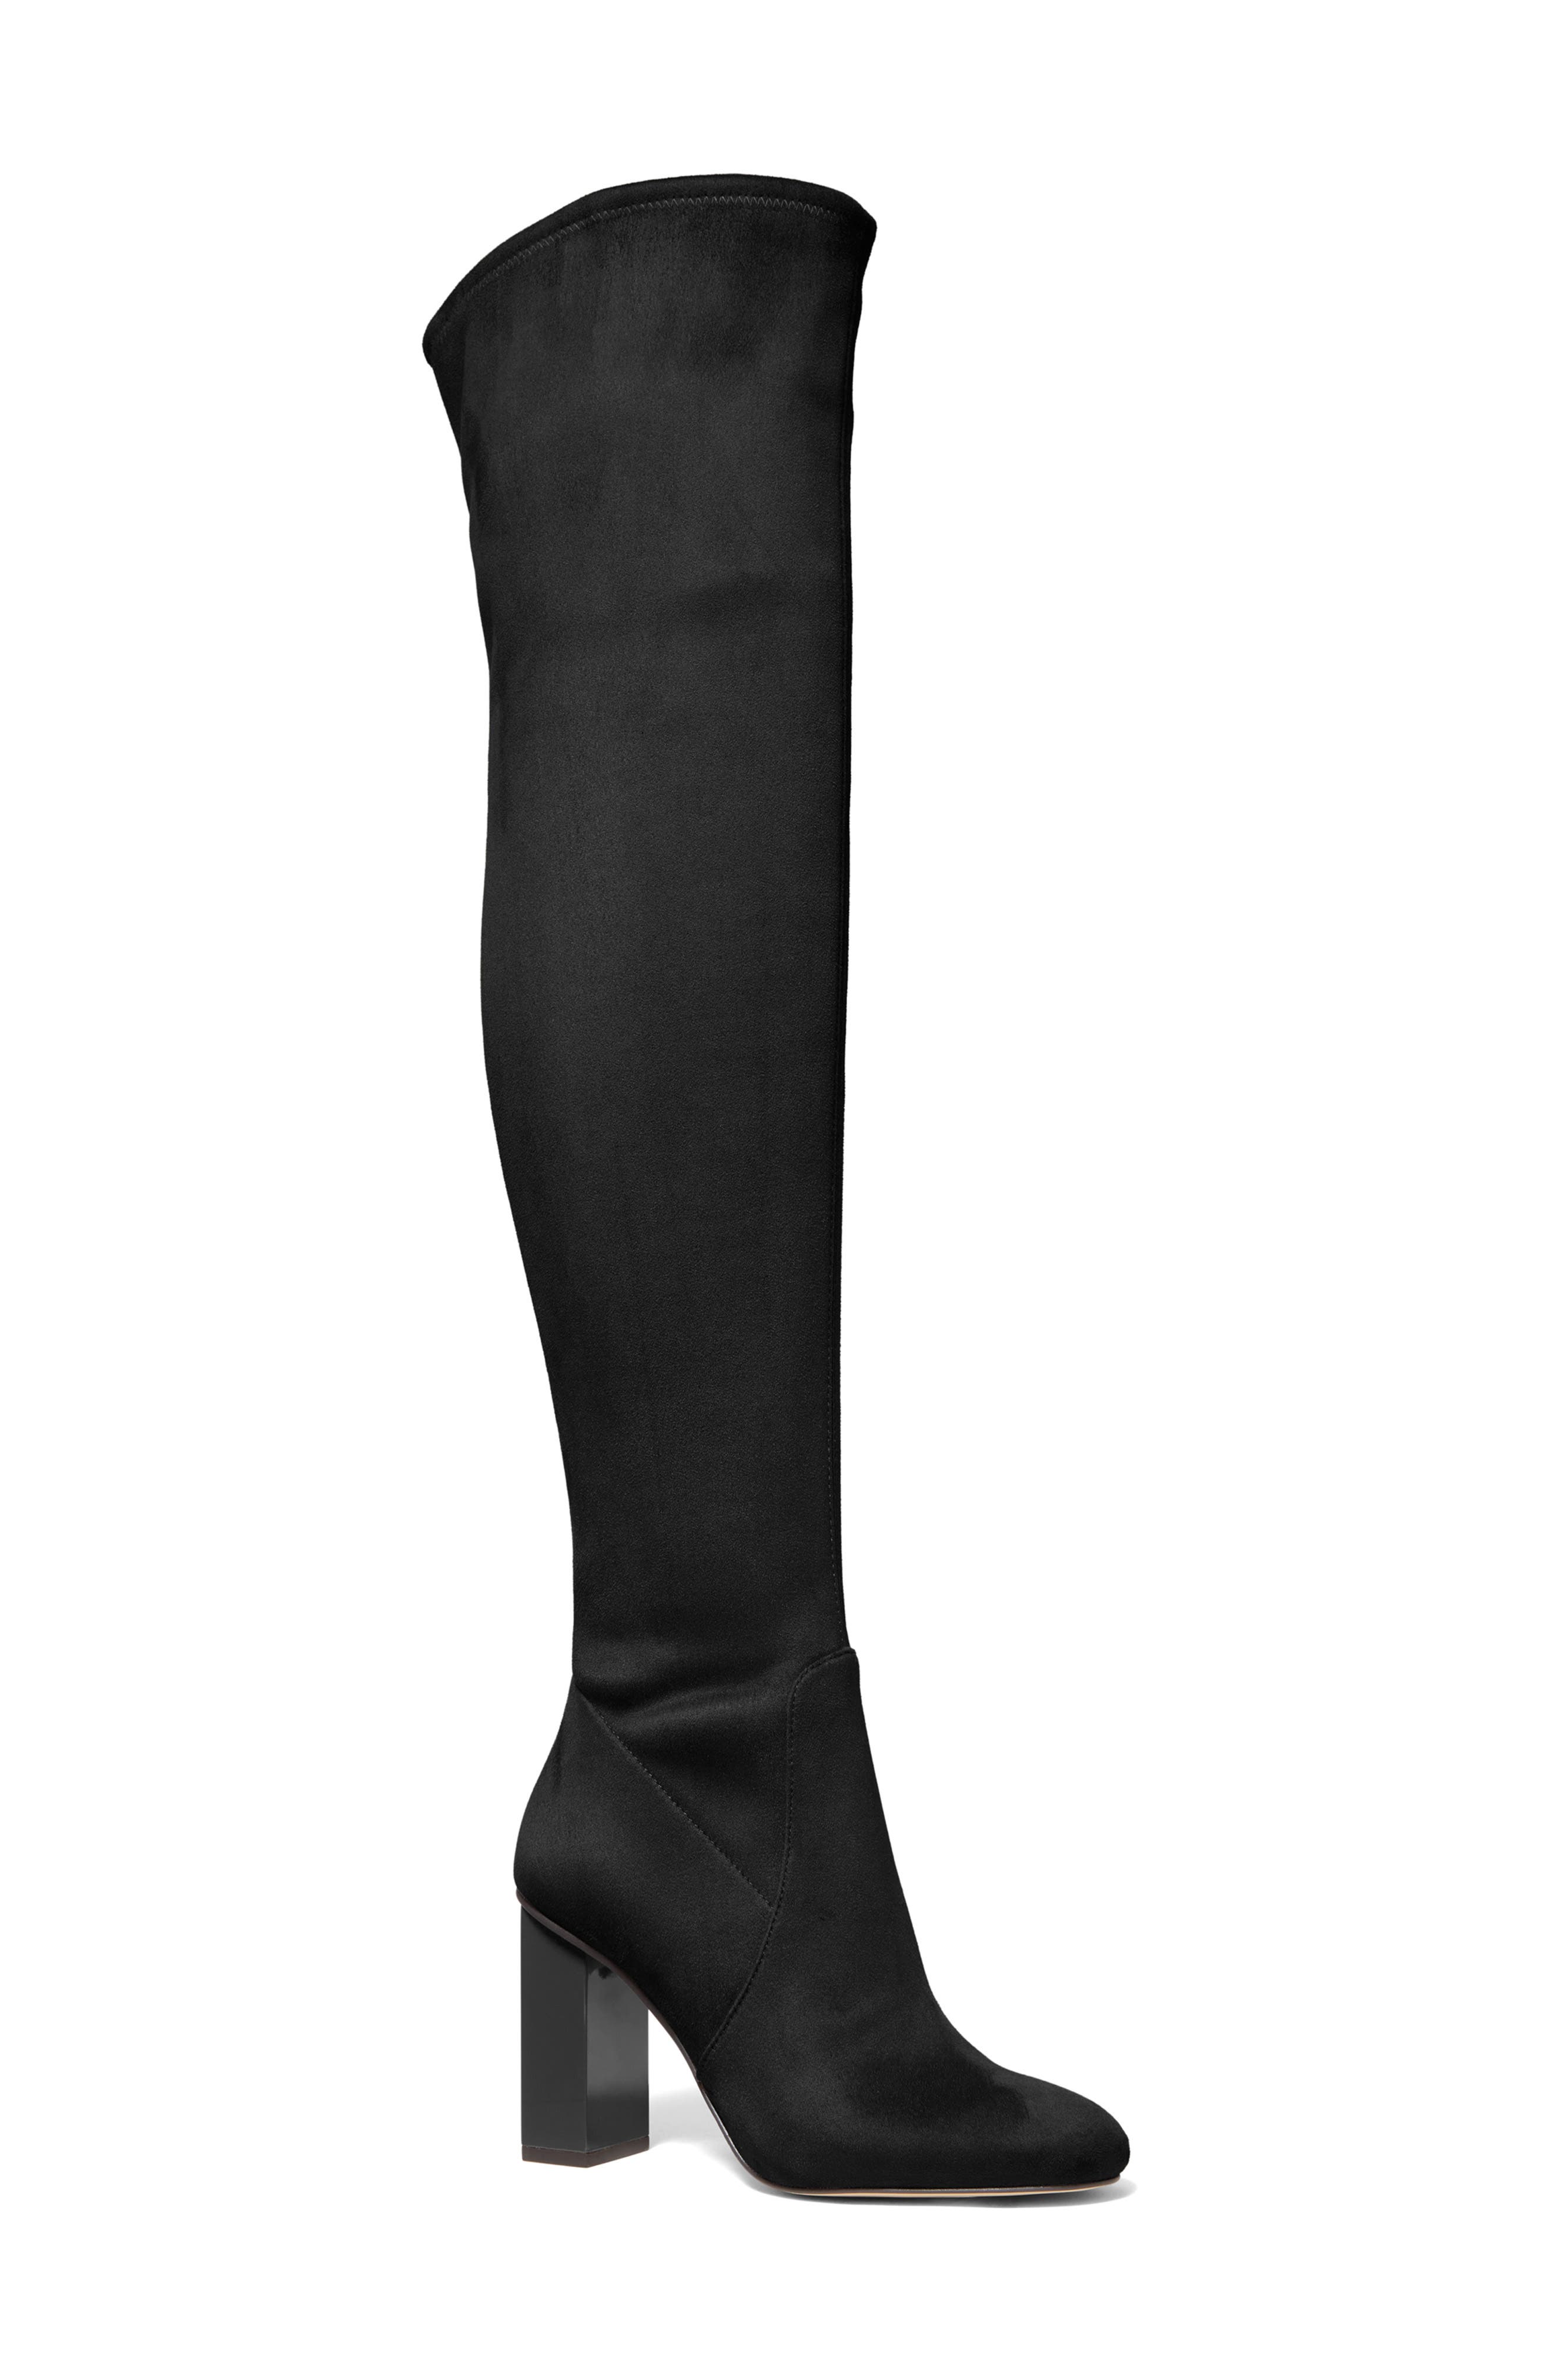 UPC 195512591556 product image for MICHAEL Michael Kors Petra Over the Knee Boot, Size 7.5 in Black at Nordstrom | upcitemdb.com